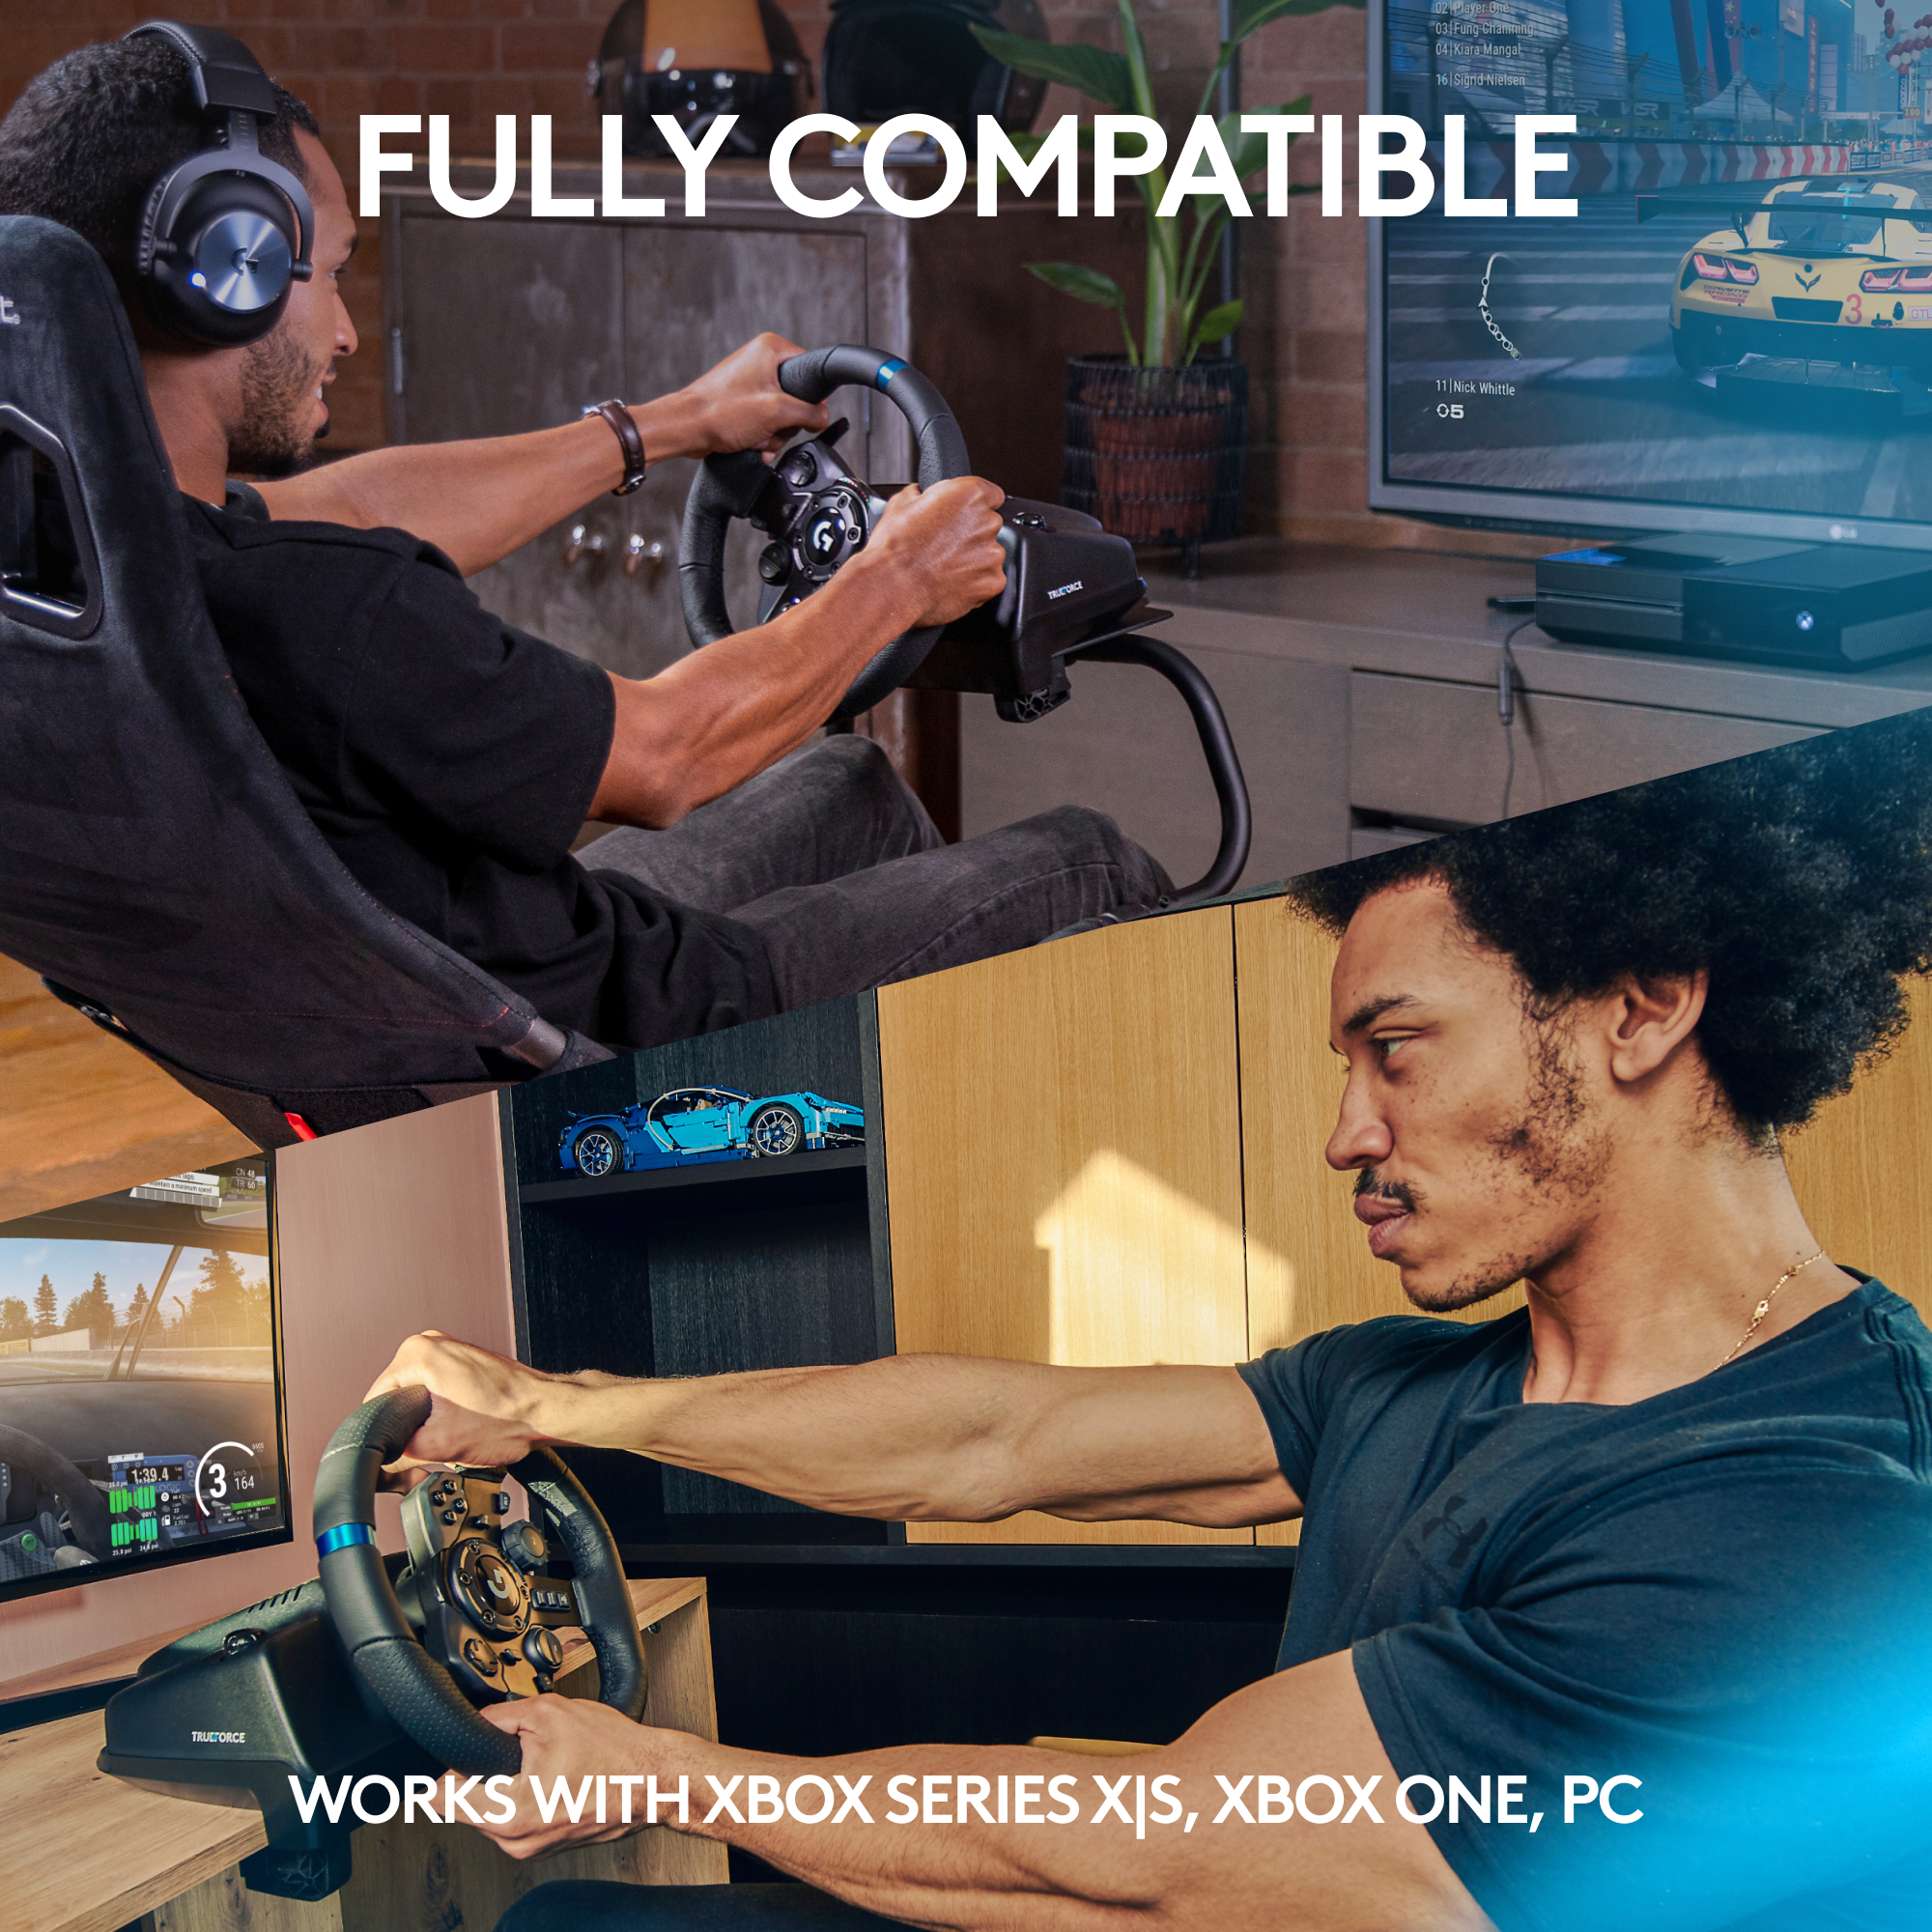 Logitech G923 Racing Wheel and Pedals Are Now $100 Off